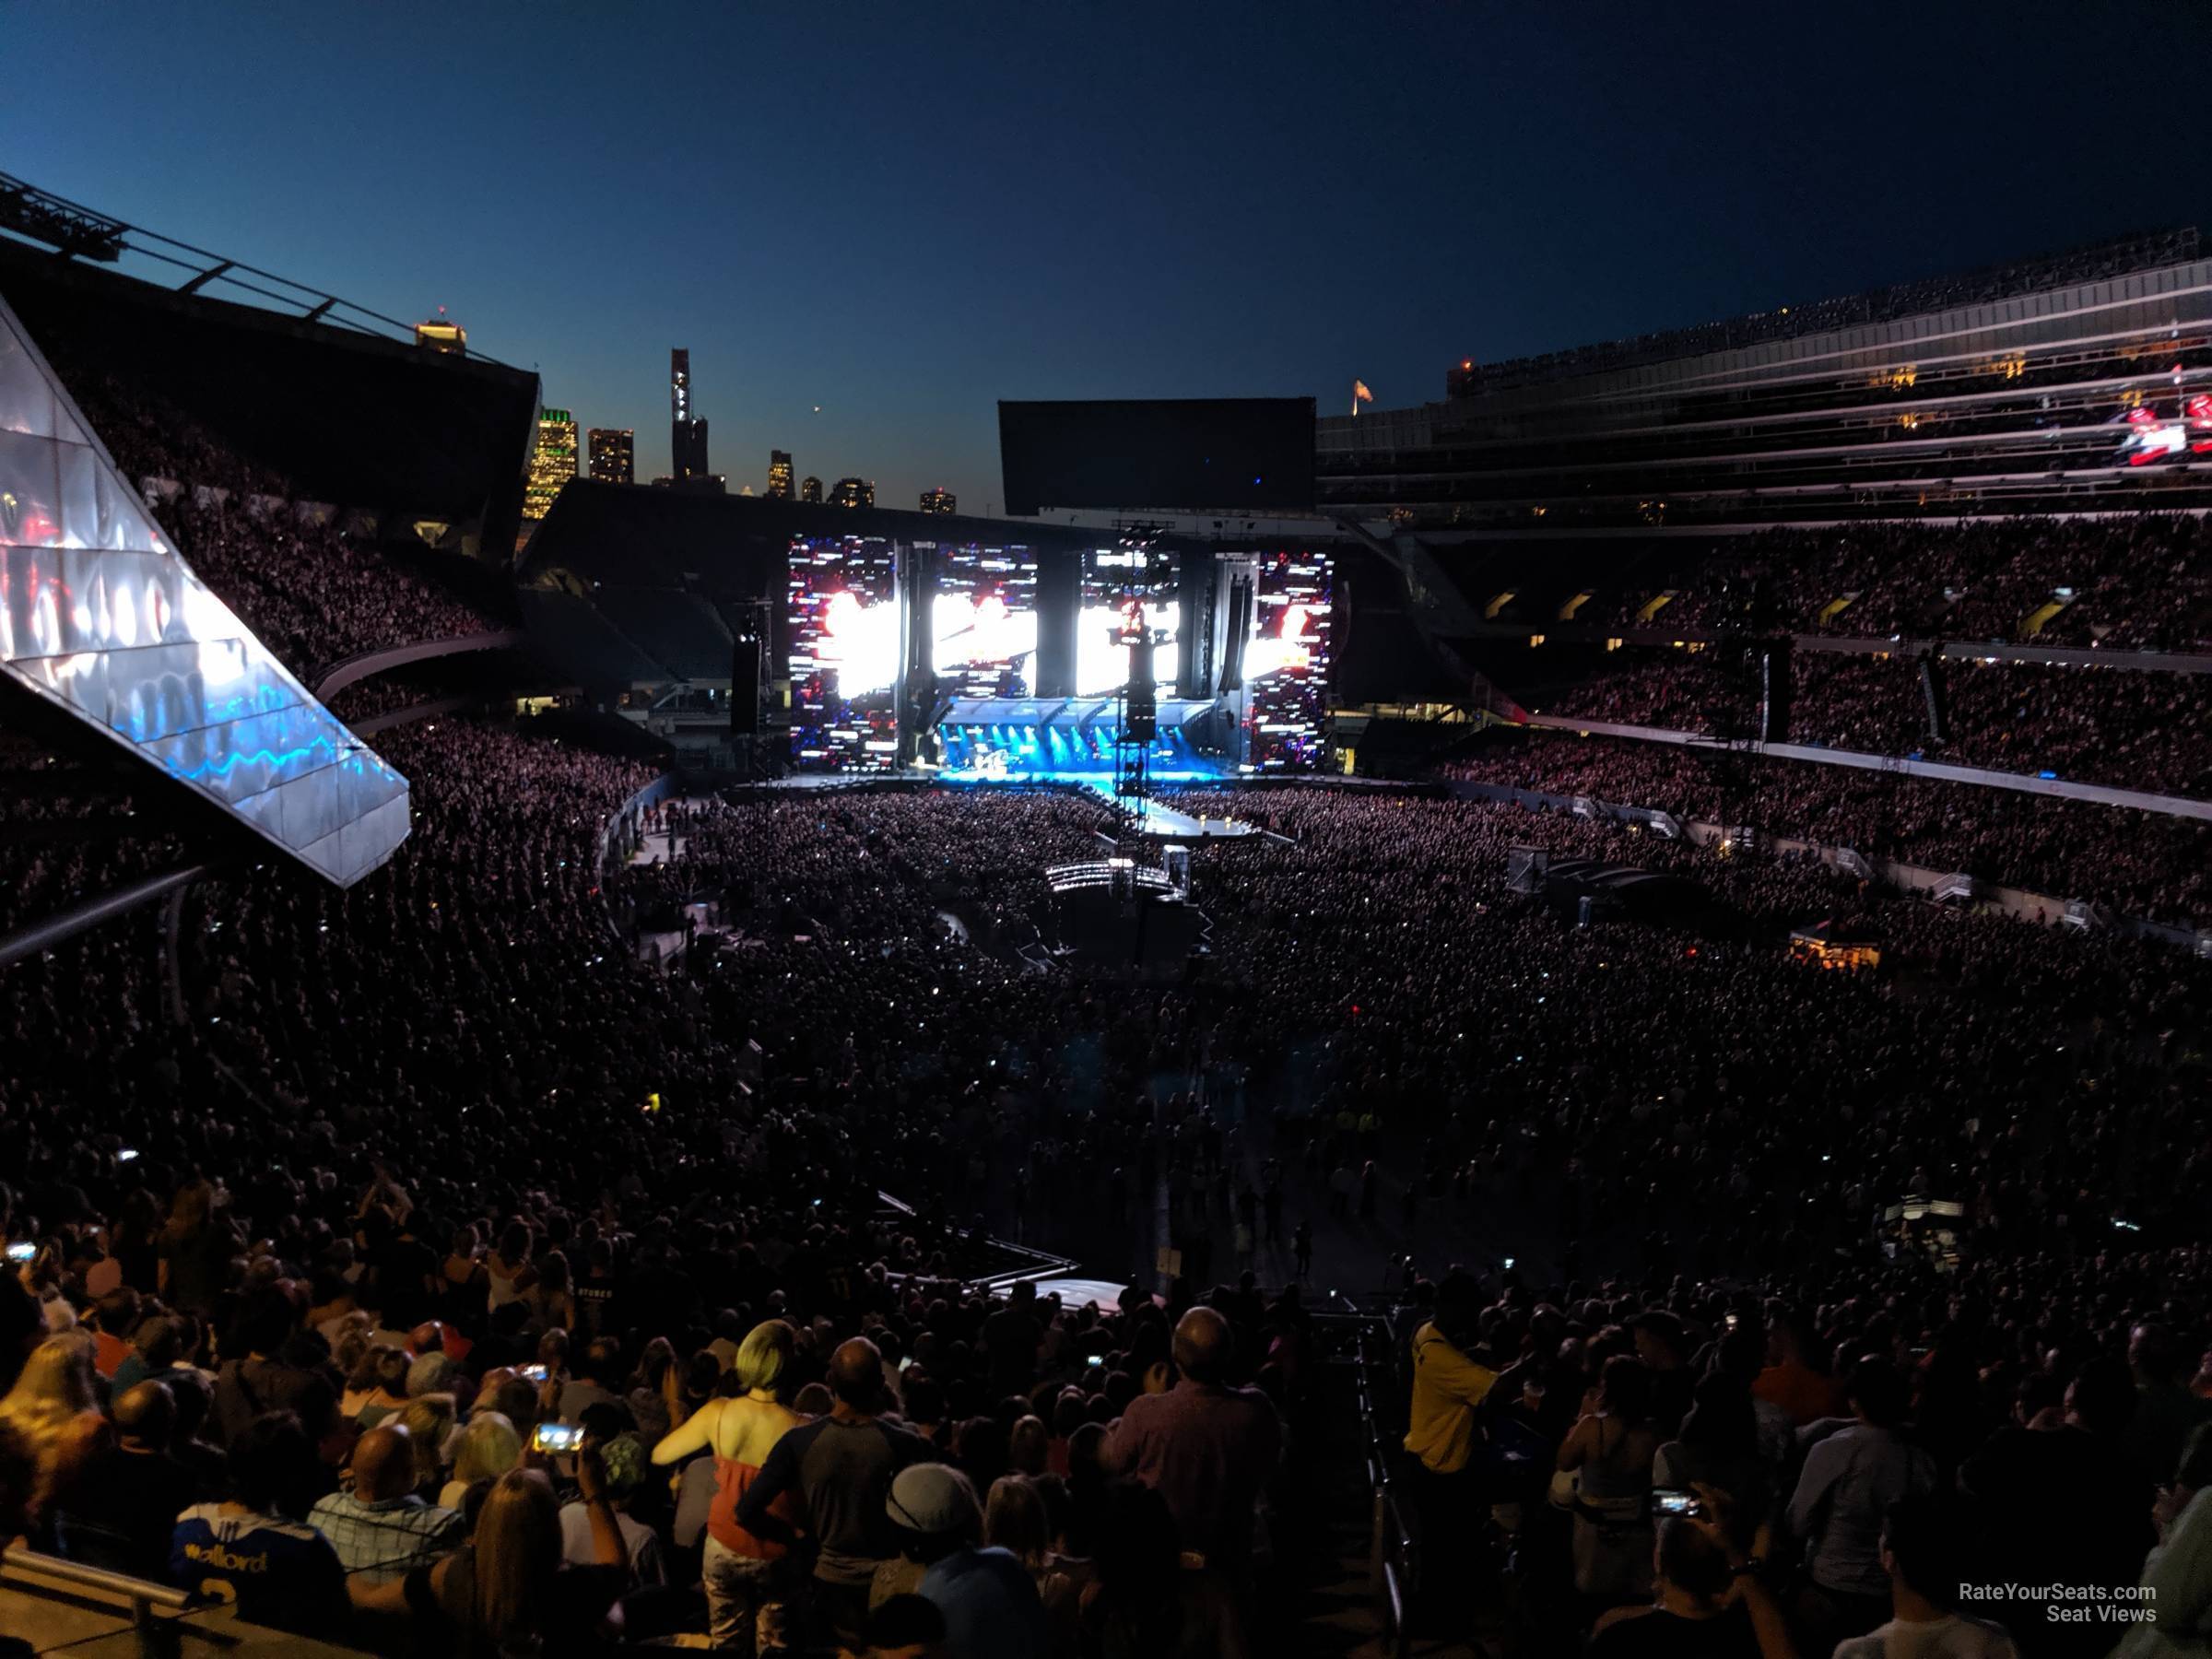 section 326, row 8 seat view  for concert - soldier field